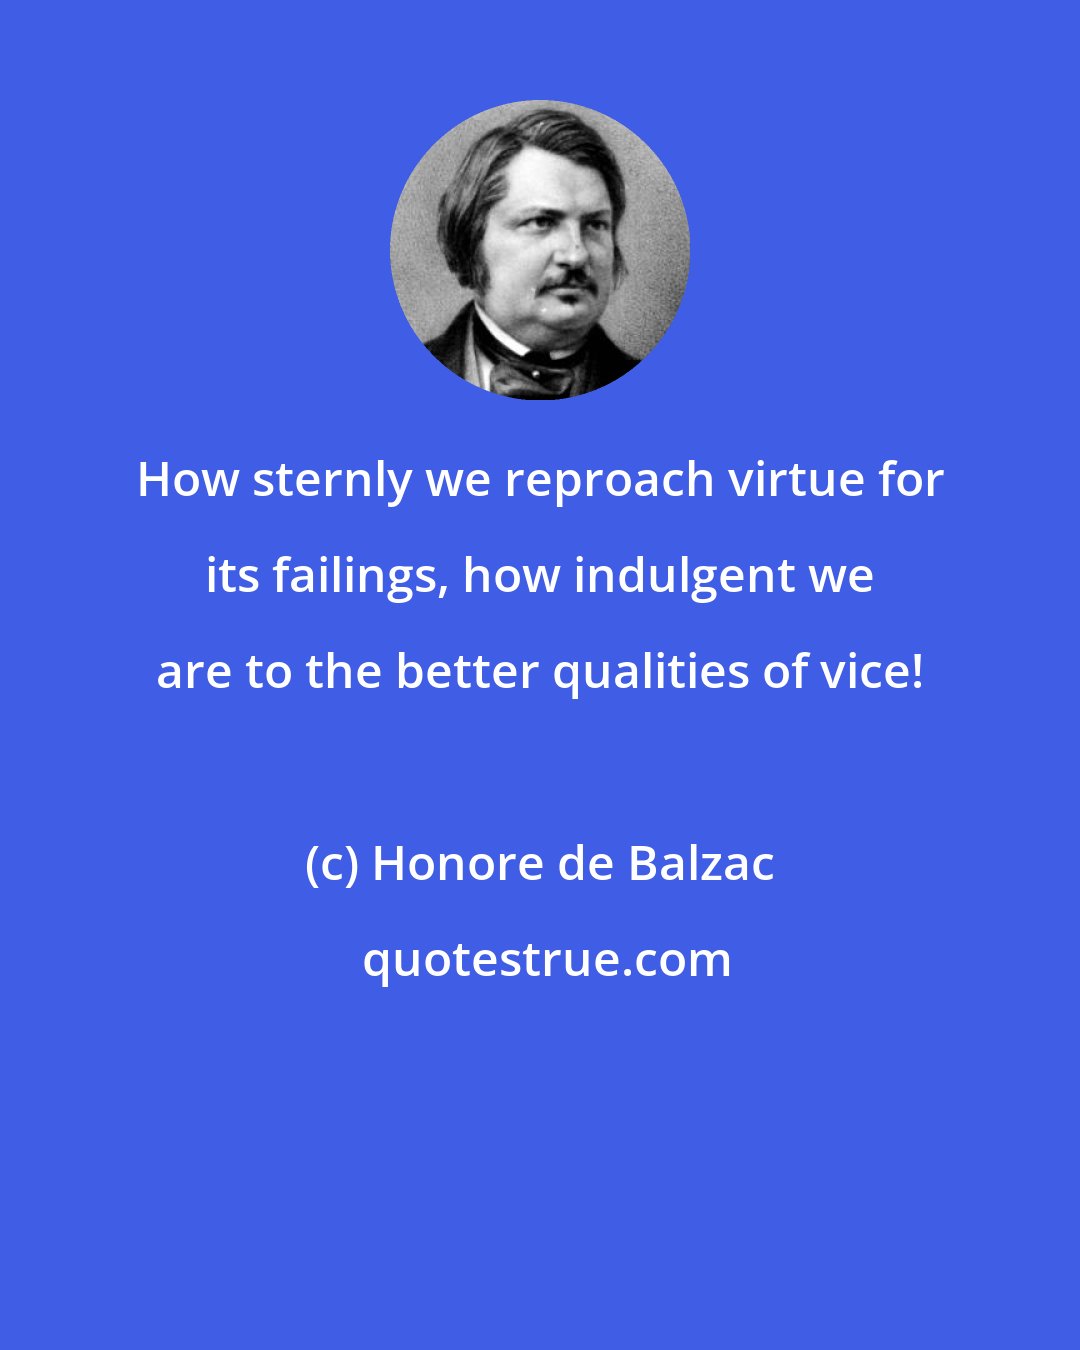 Honore de Balzac: How sternly we reproach virtue for its failings, how indulgent we are to the better qualities of vice!